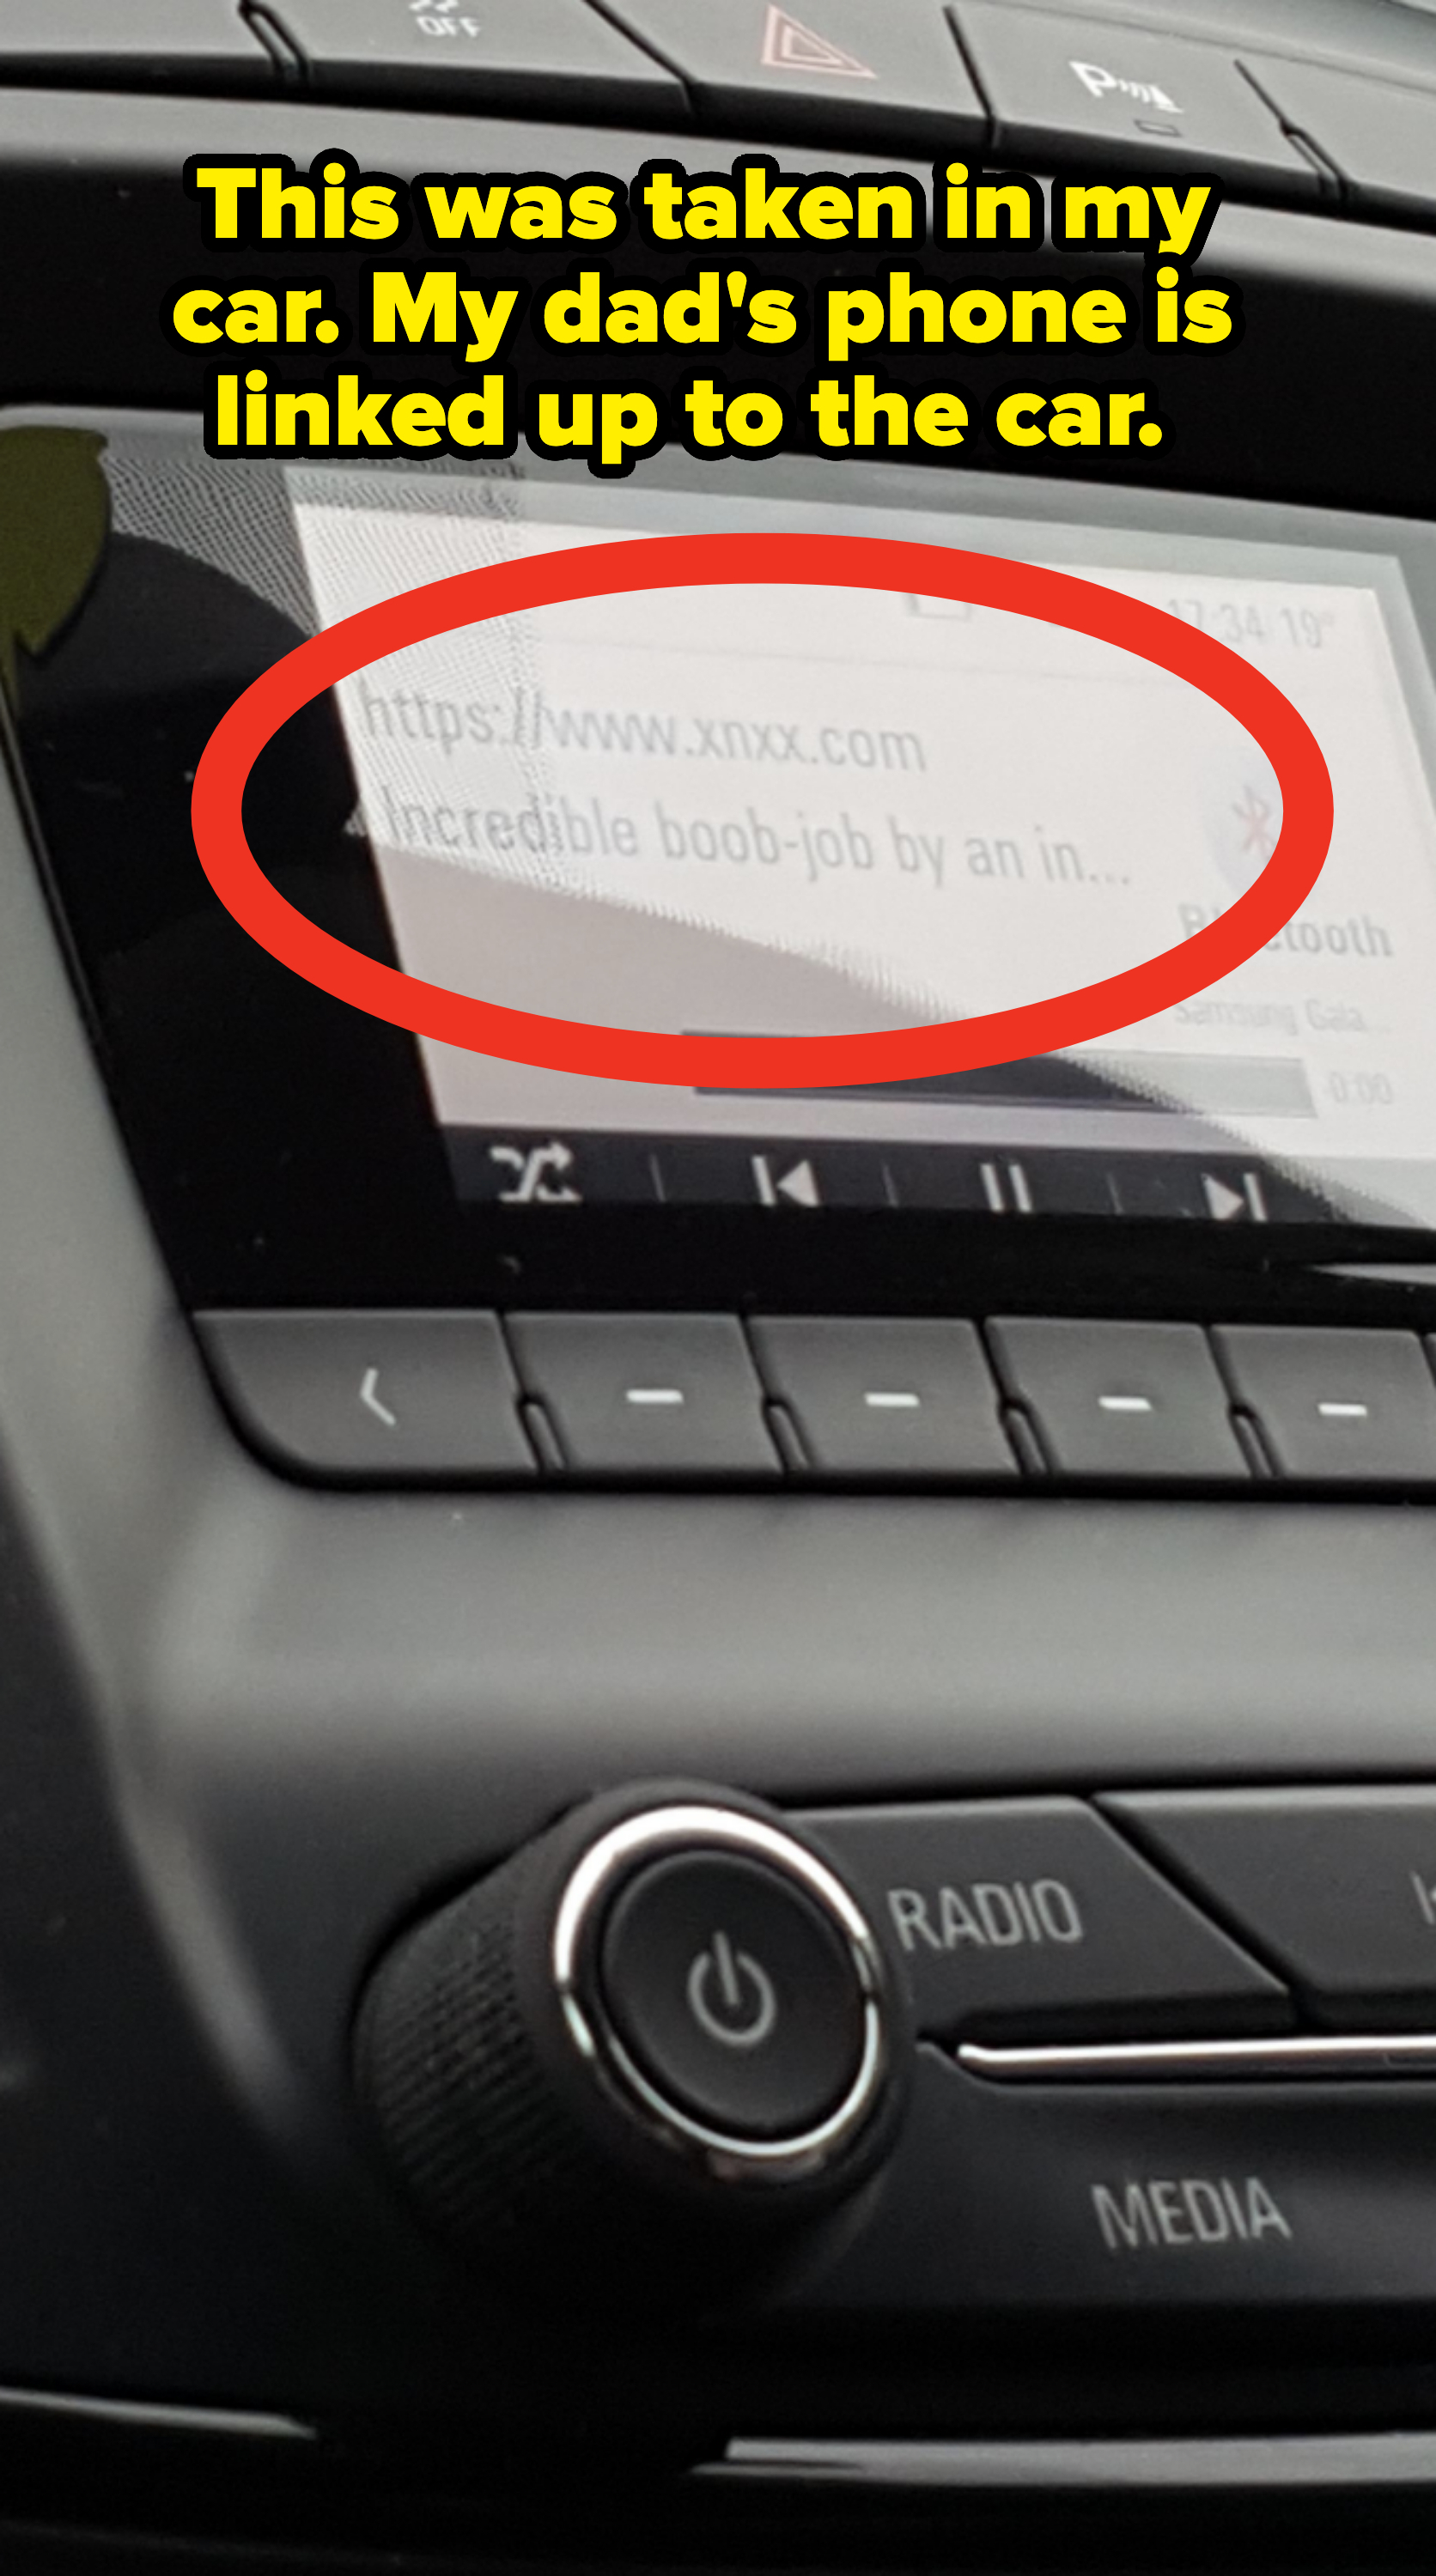 Car dashboard screen displaying inappropriate content with explicit language, showing the title &quot;Incredible boob-job by an in...&quot;. Below, a song is playing via Bluetooth